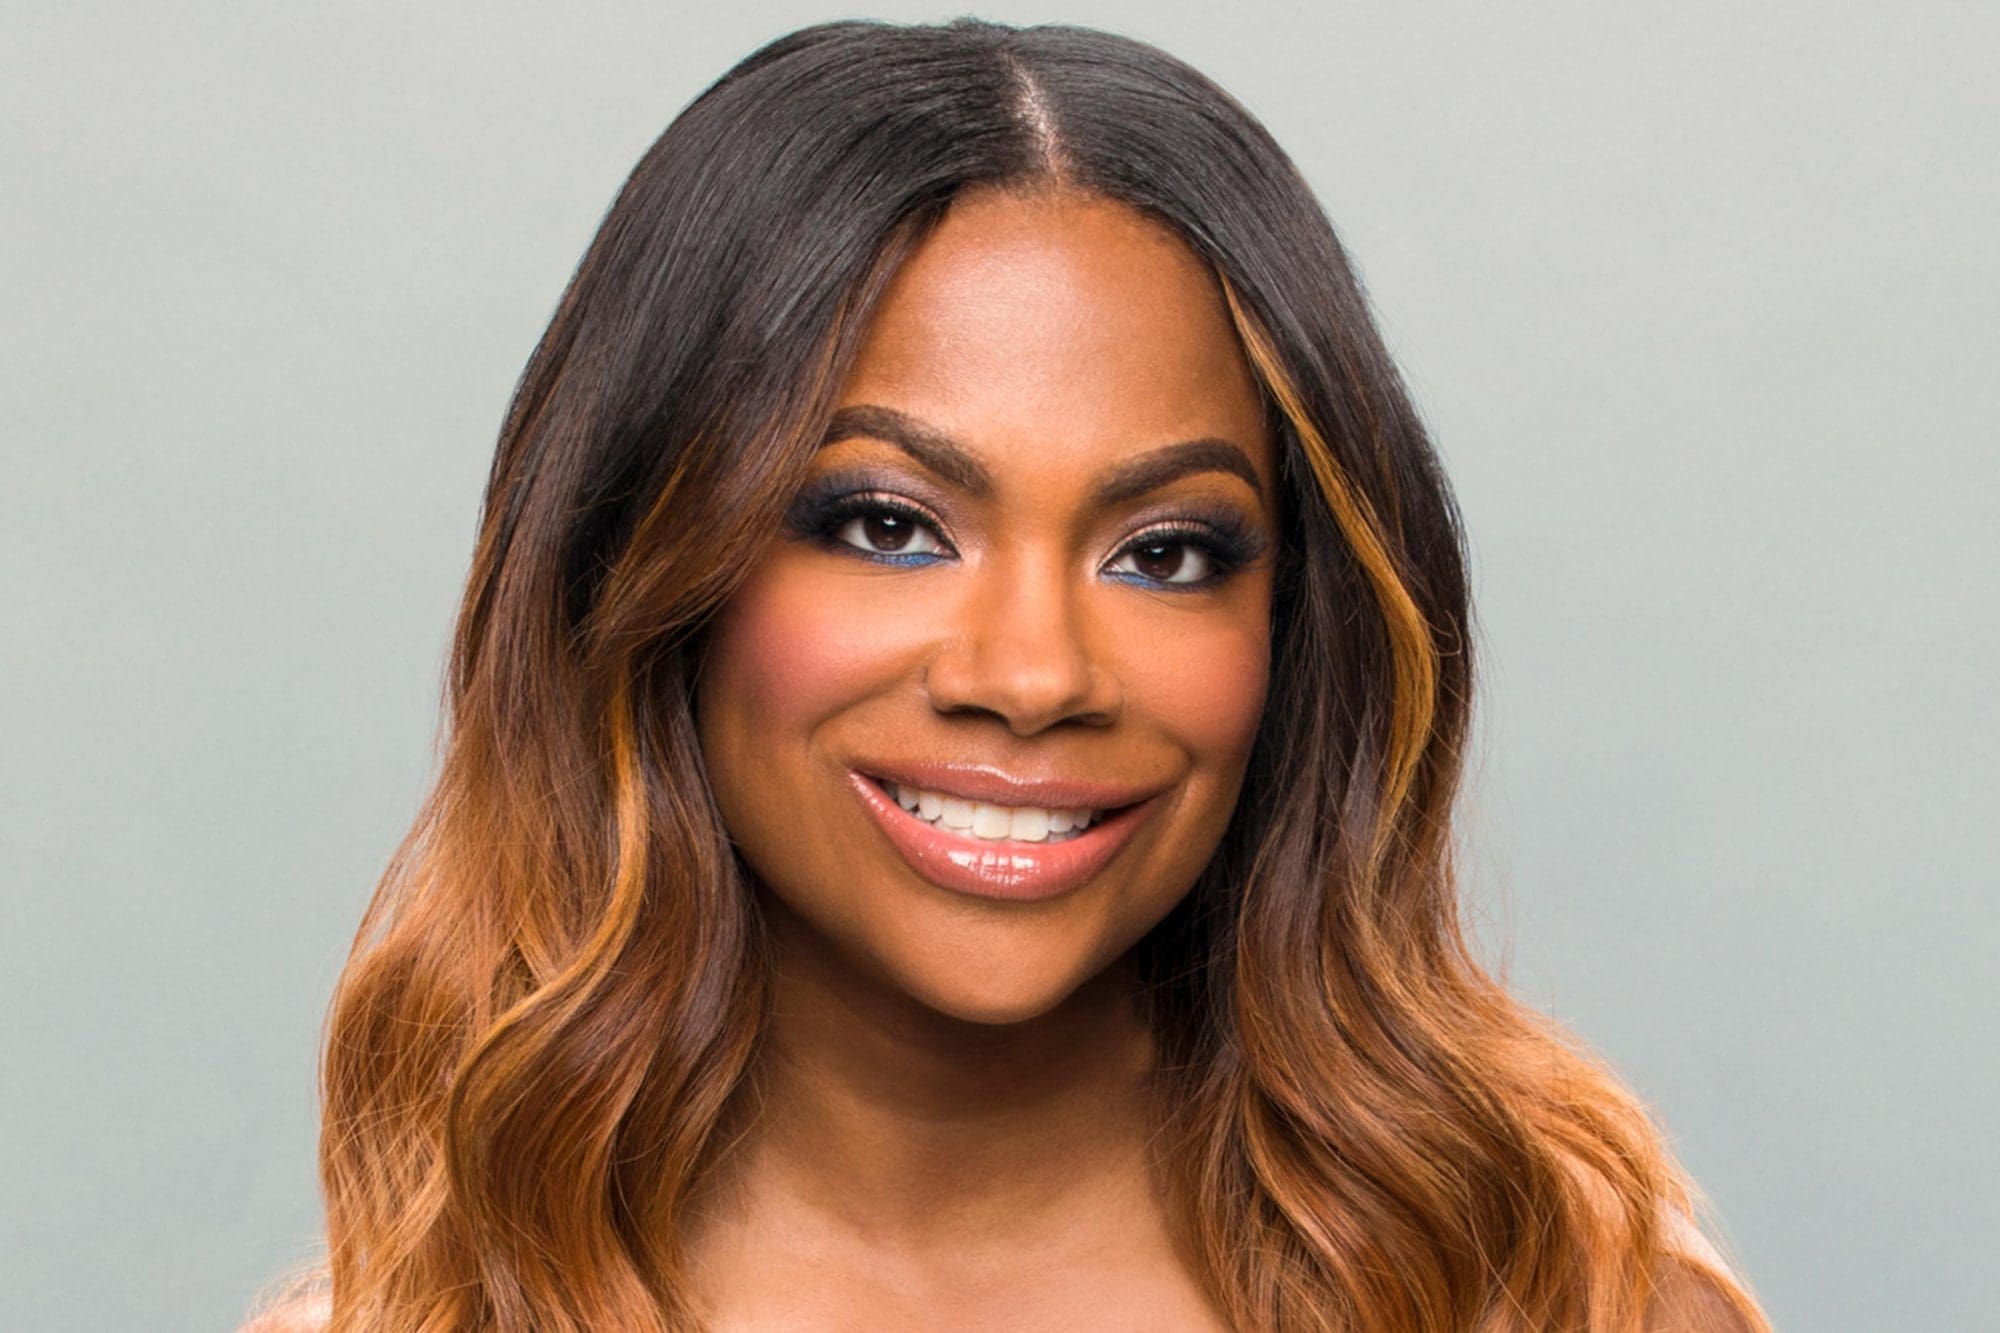 Kandi Burruss Tells Her Fans That There Are Only Two Episodes Left Of 'The Chi'